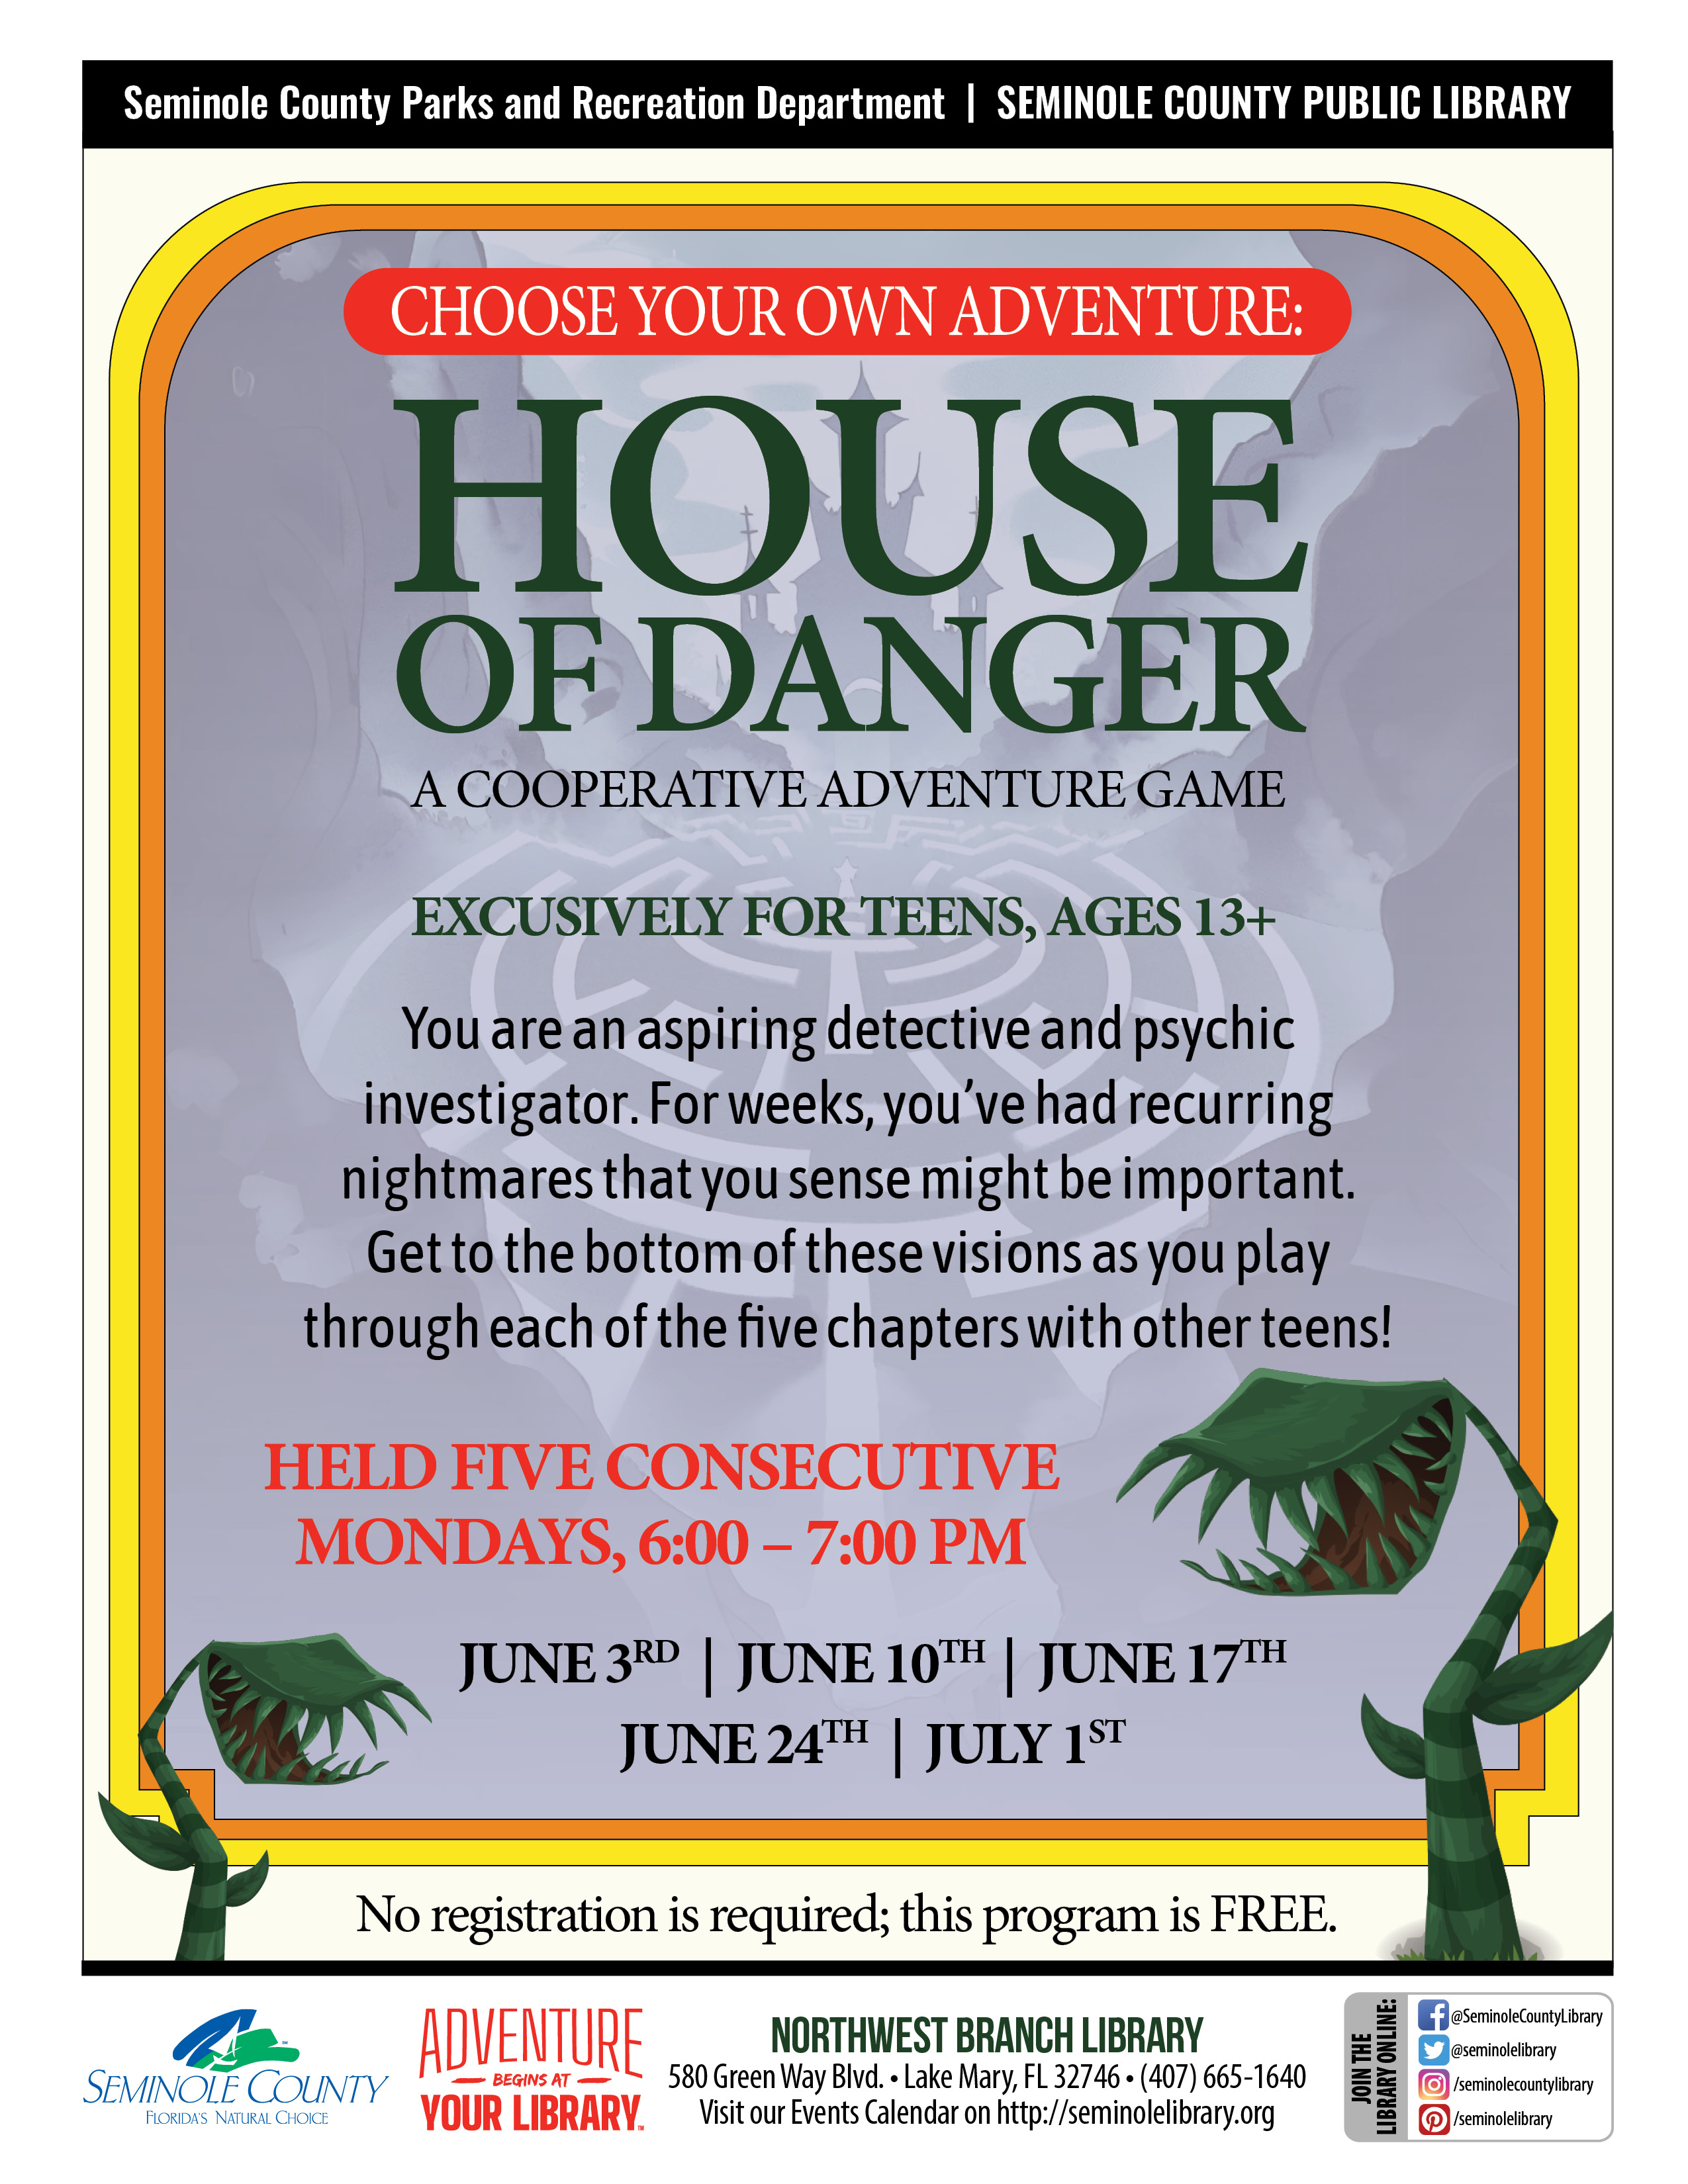 Choose Your Own Adventure - House of Danger for Teens